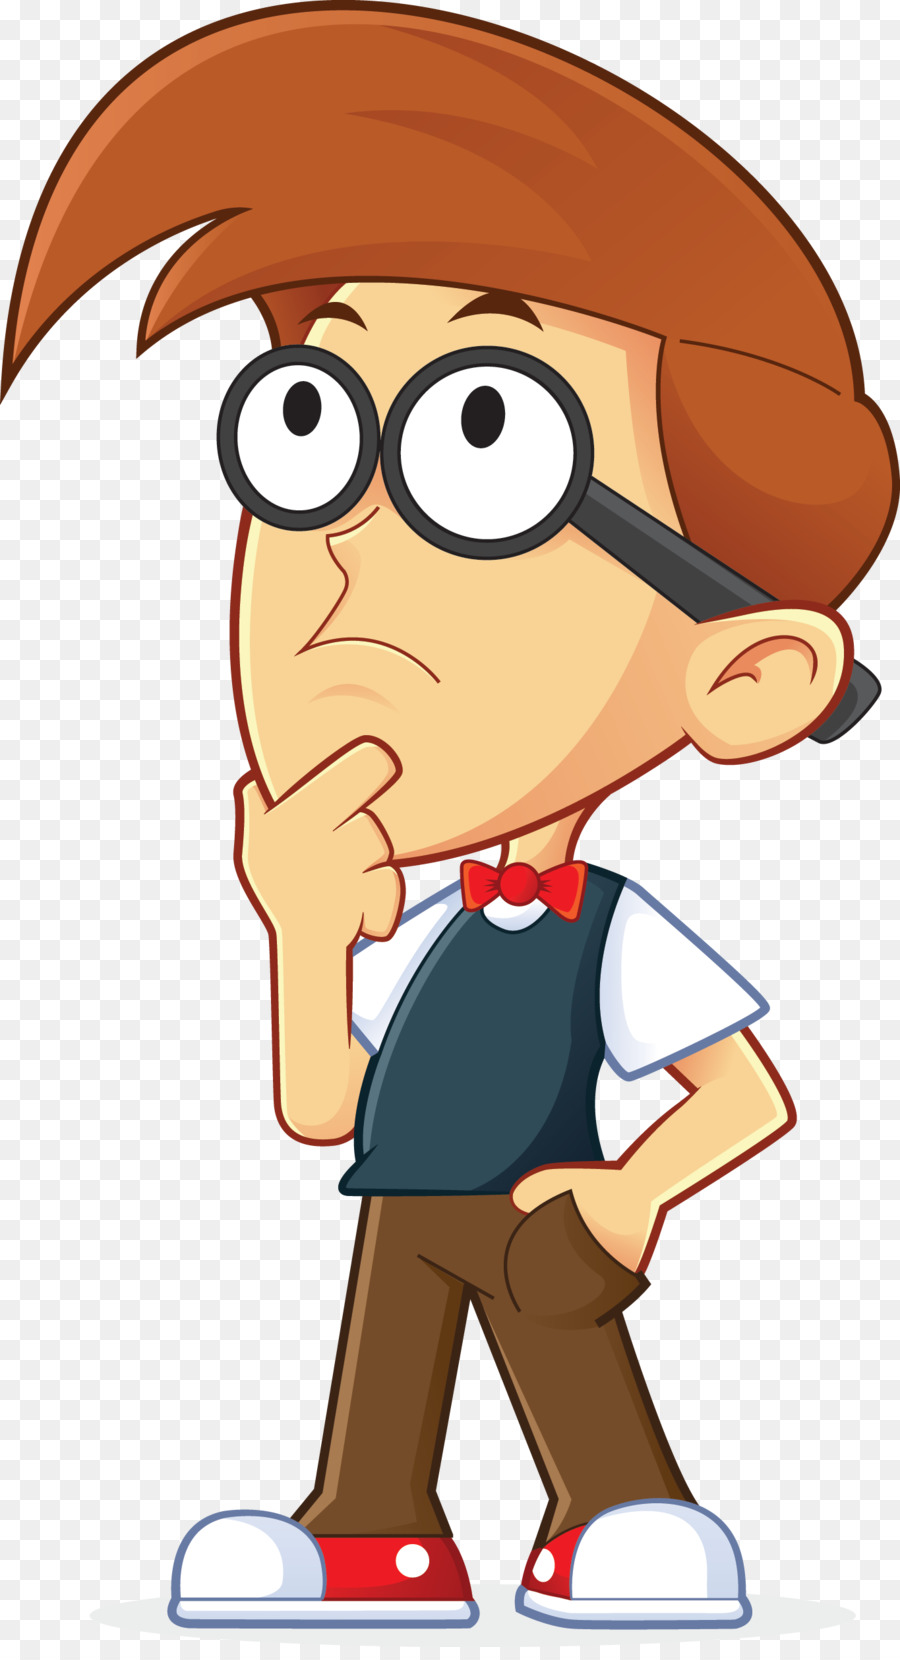 Cartoon Thought Clip art - thinking man png download - 1365*2498 - Free Transparent  png Download.